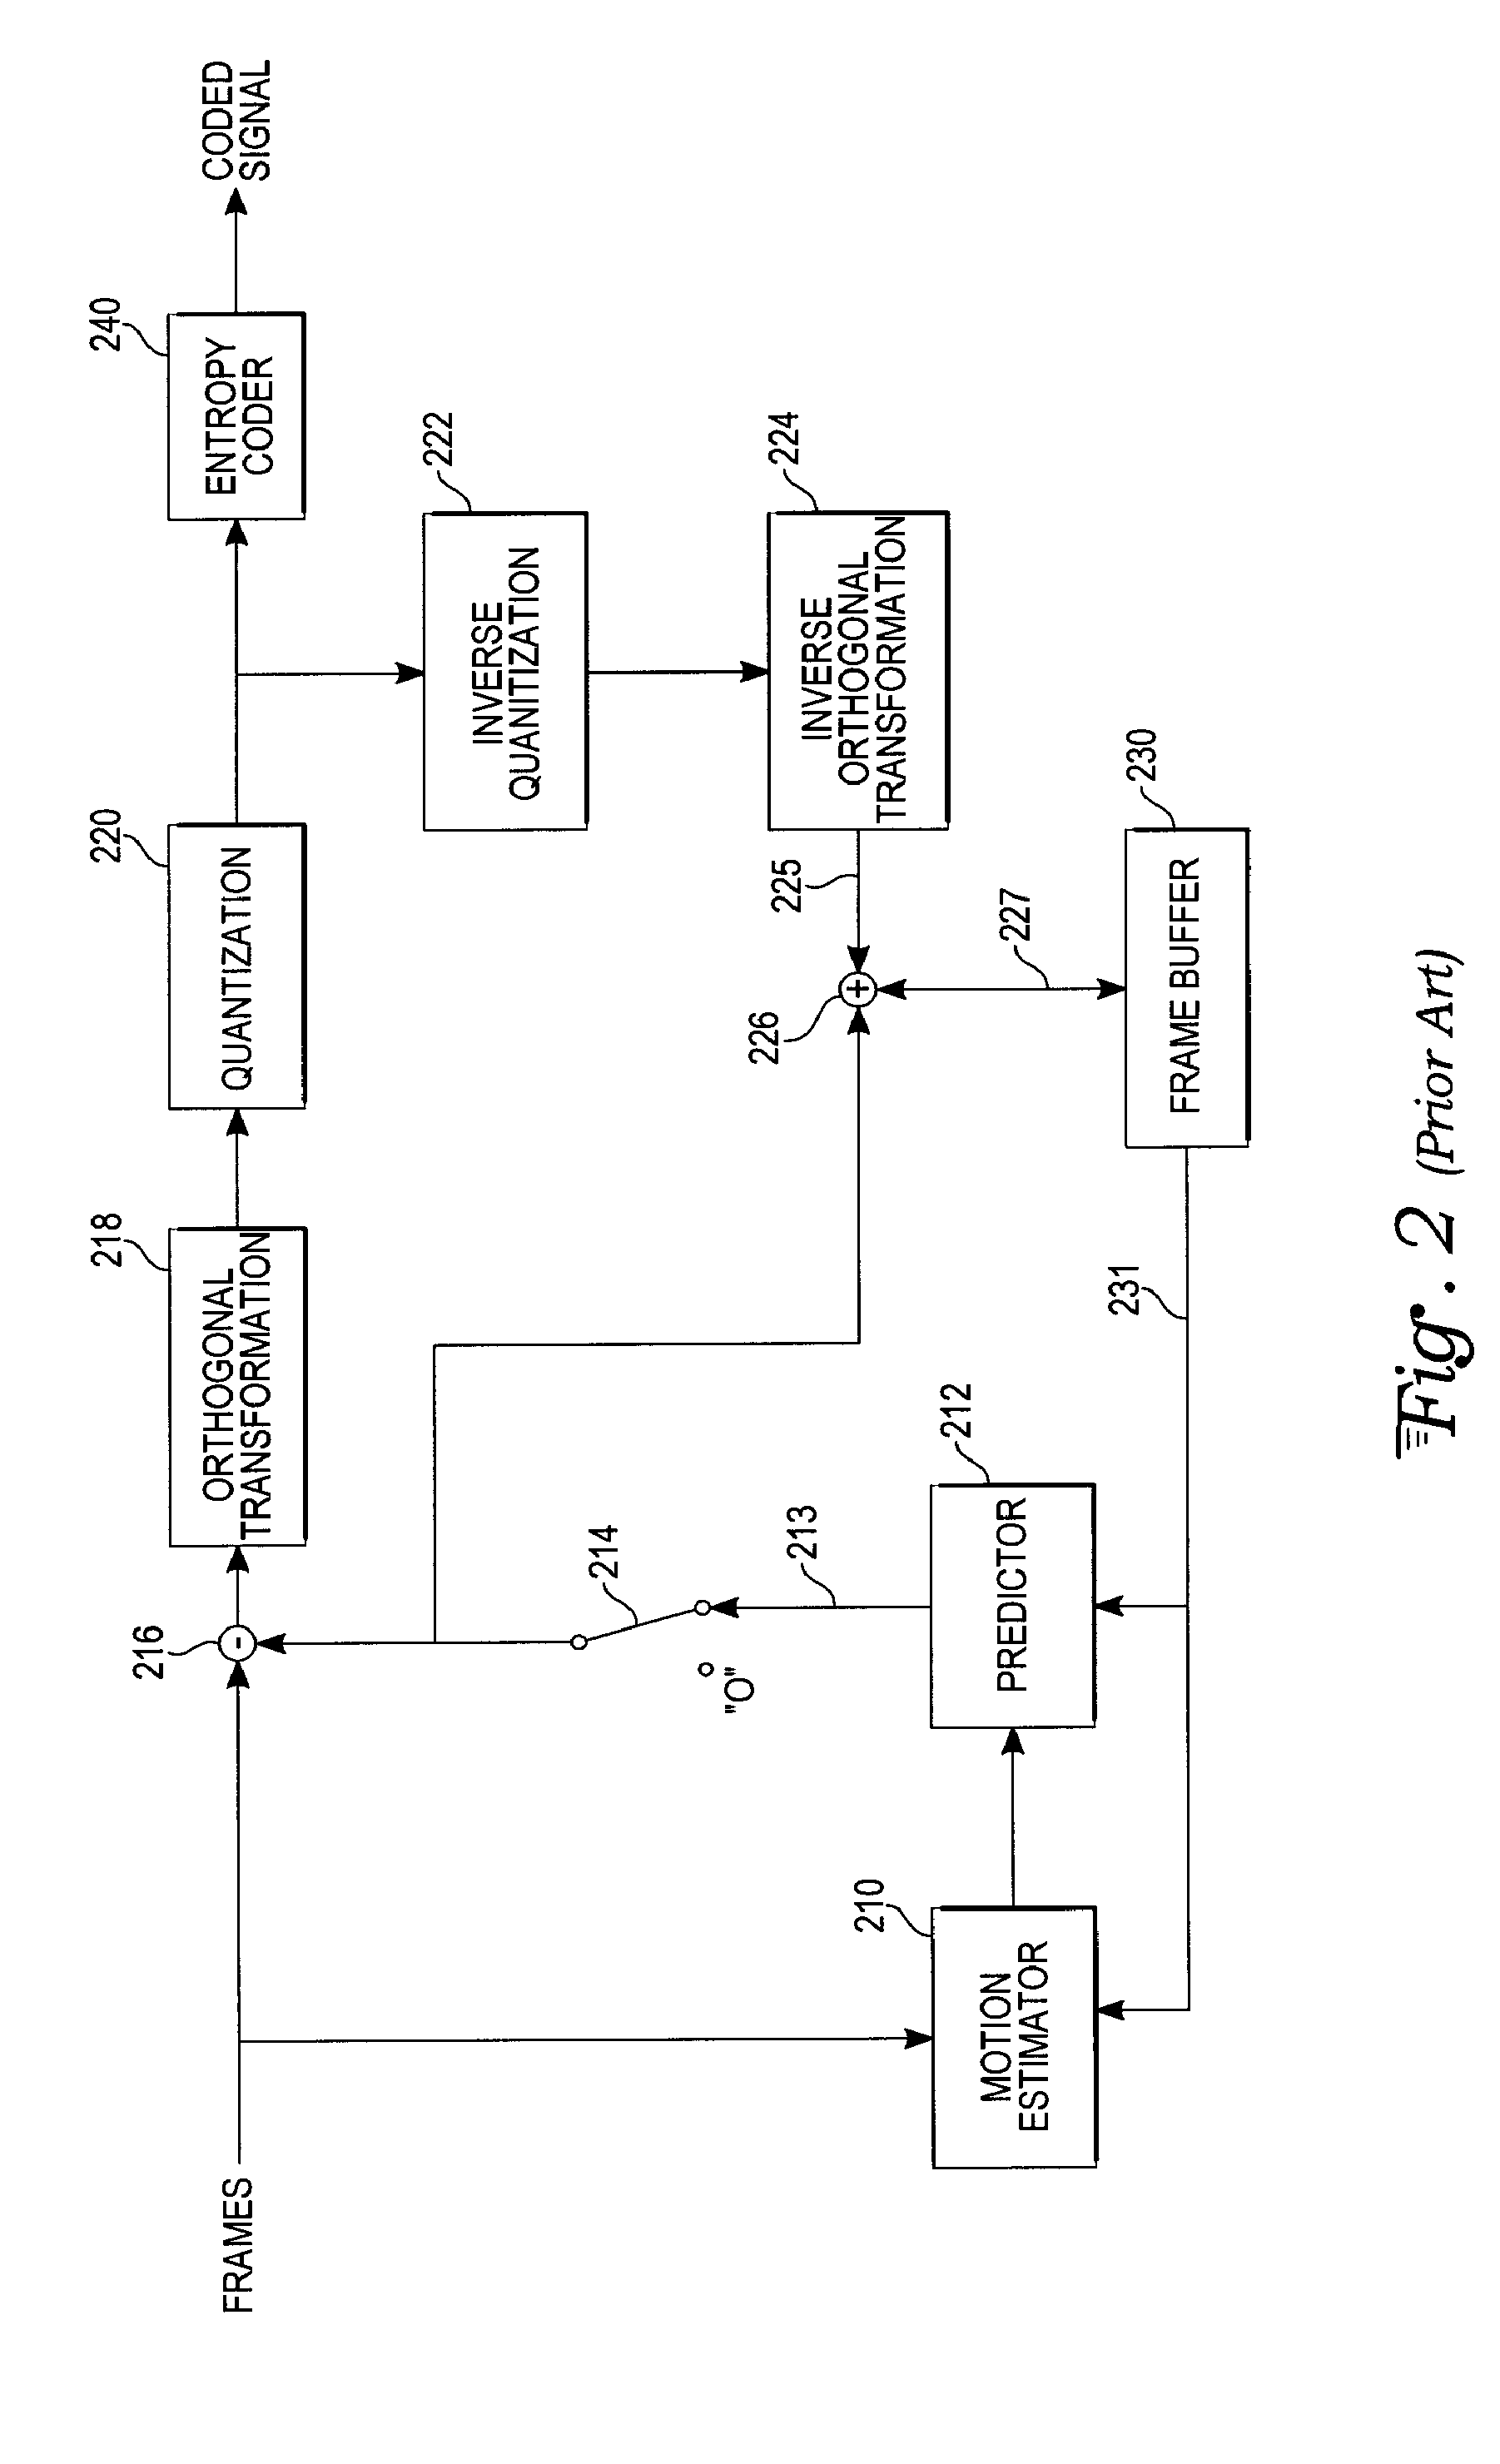 Method and apparatus for encoding and decoding of video streams